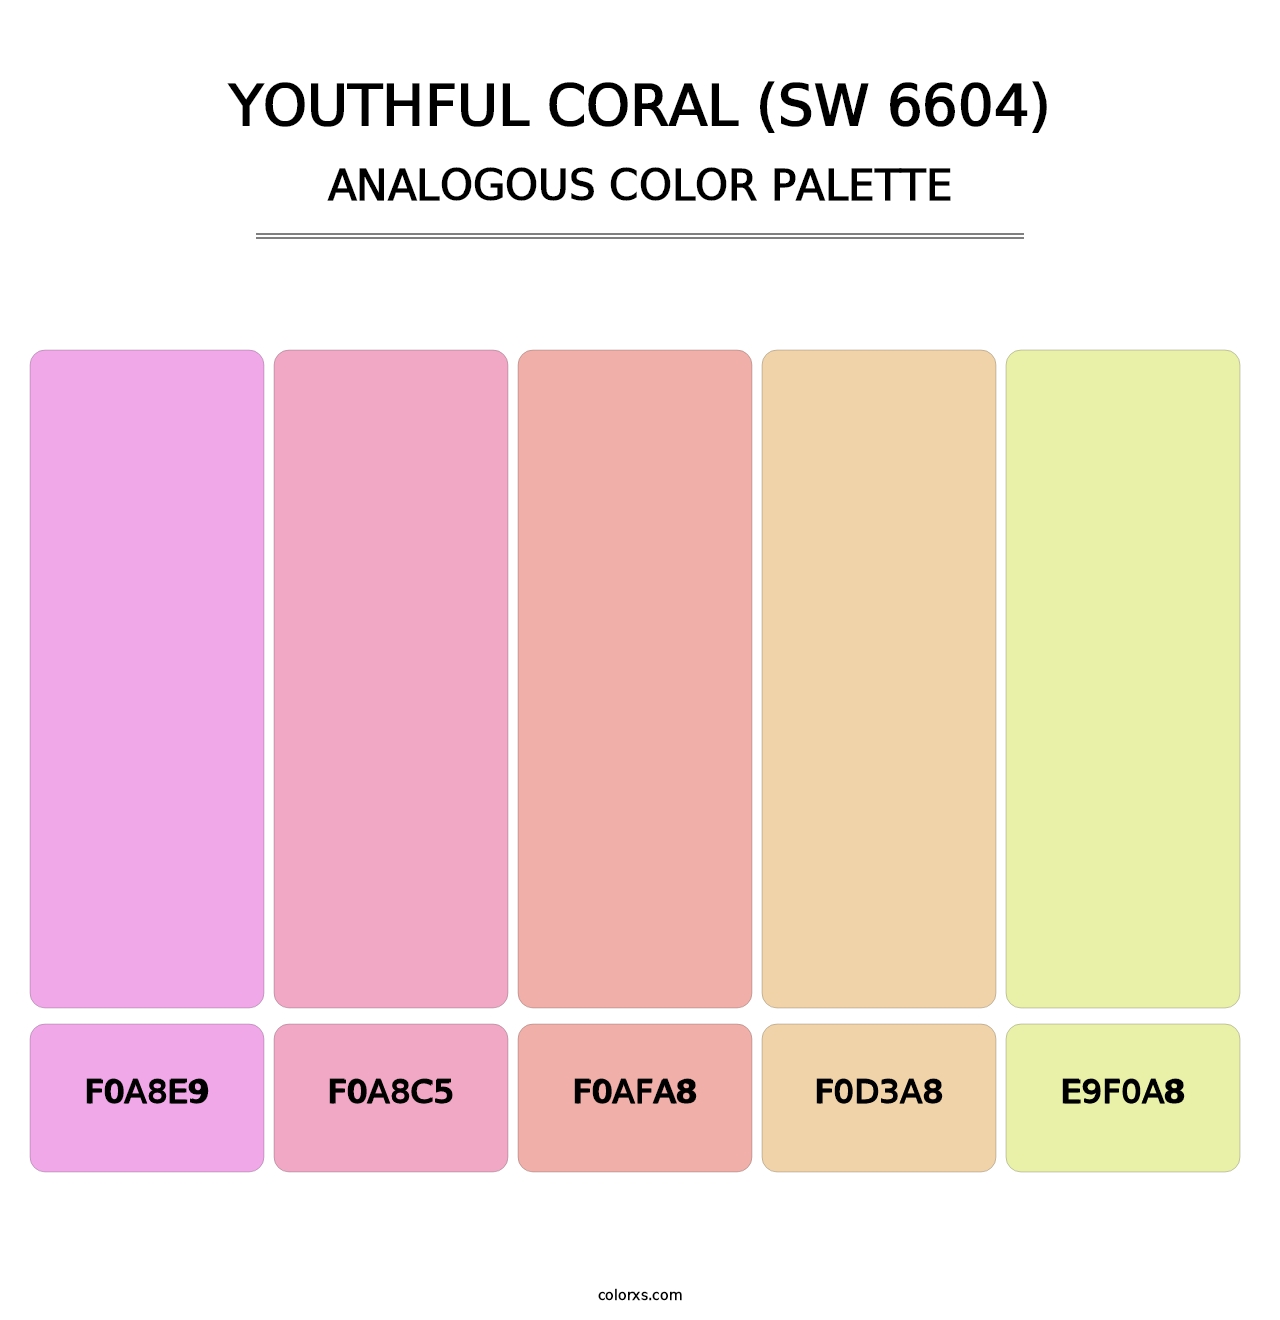 Youthful Coral (SW 6604) - Analogous Color Palette